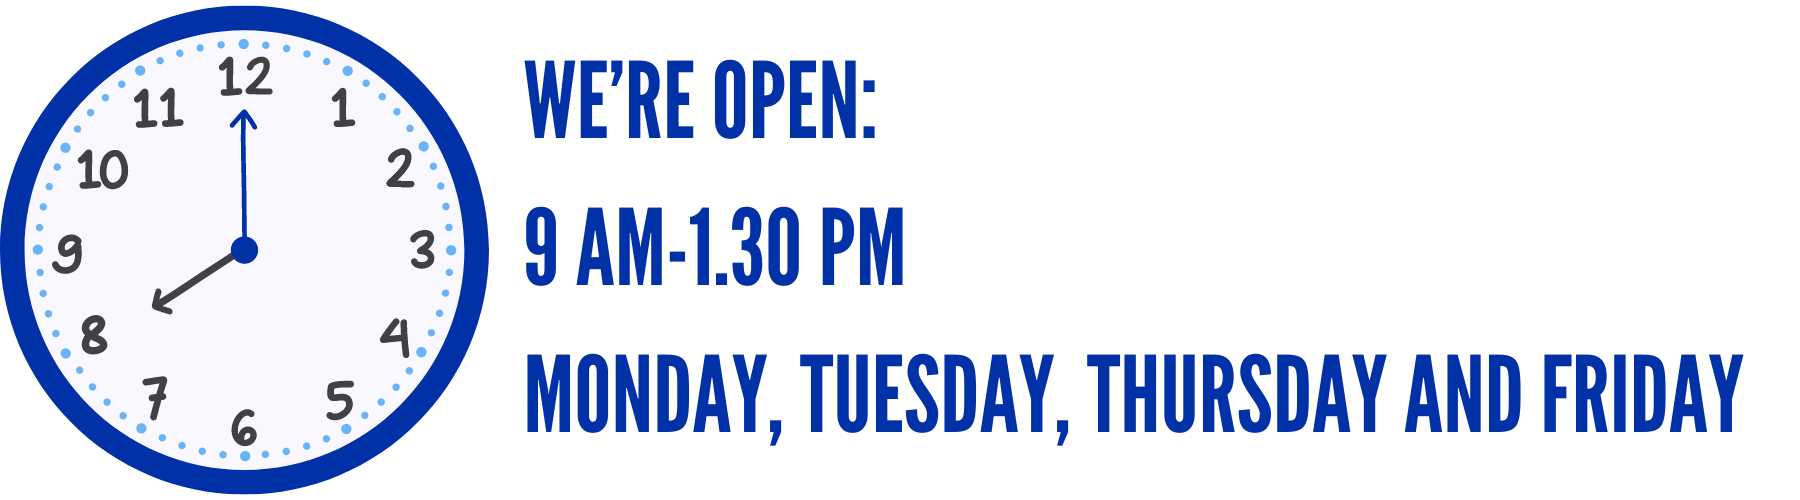 we're open monday, tuesday, Thursday and friday from 9am to 1:30 pm. 